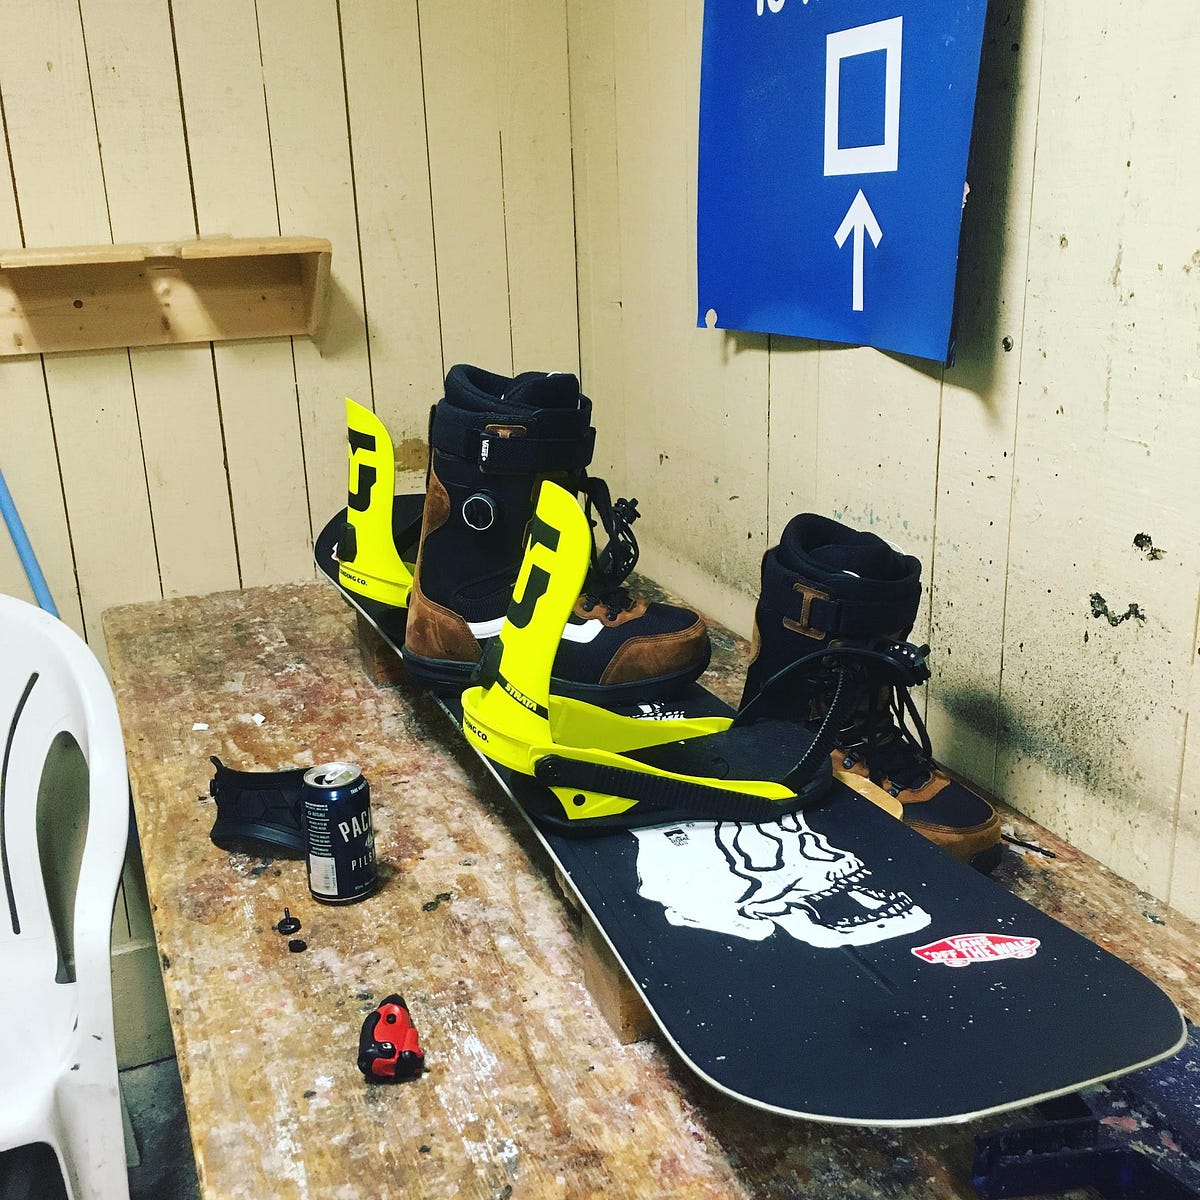 Do you need to wax a new snowboard?